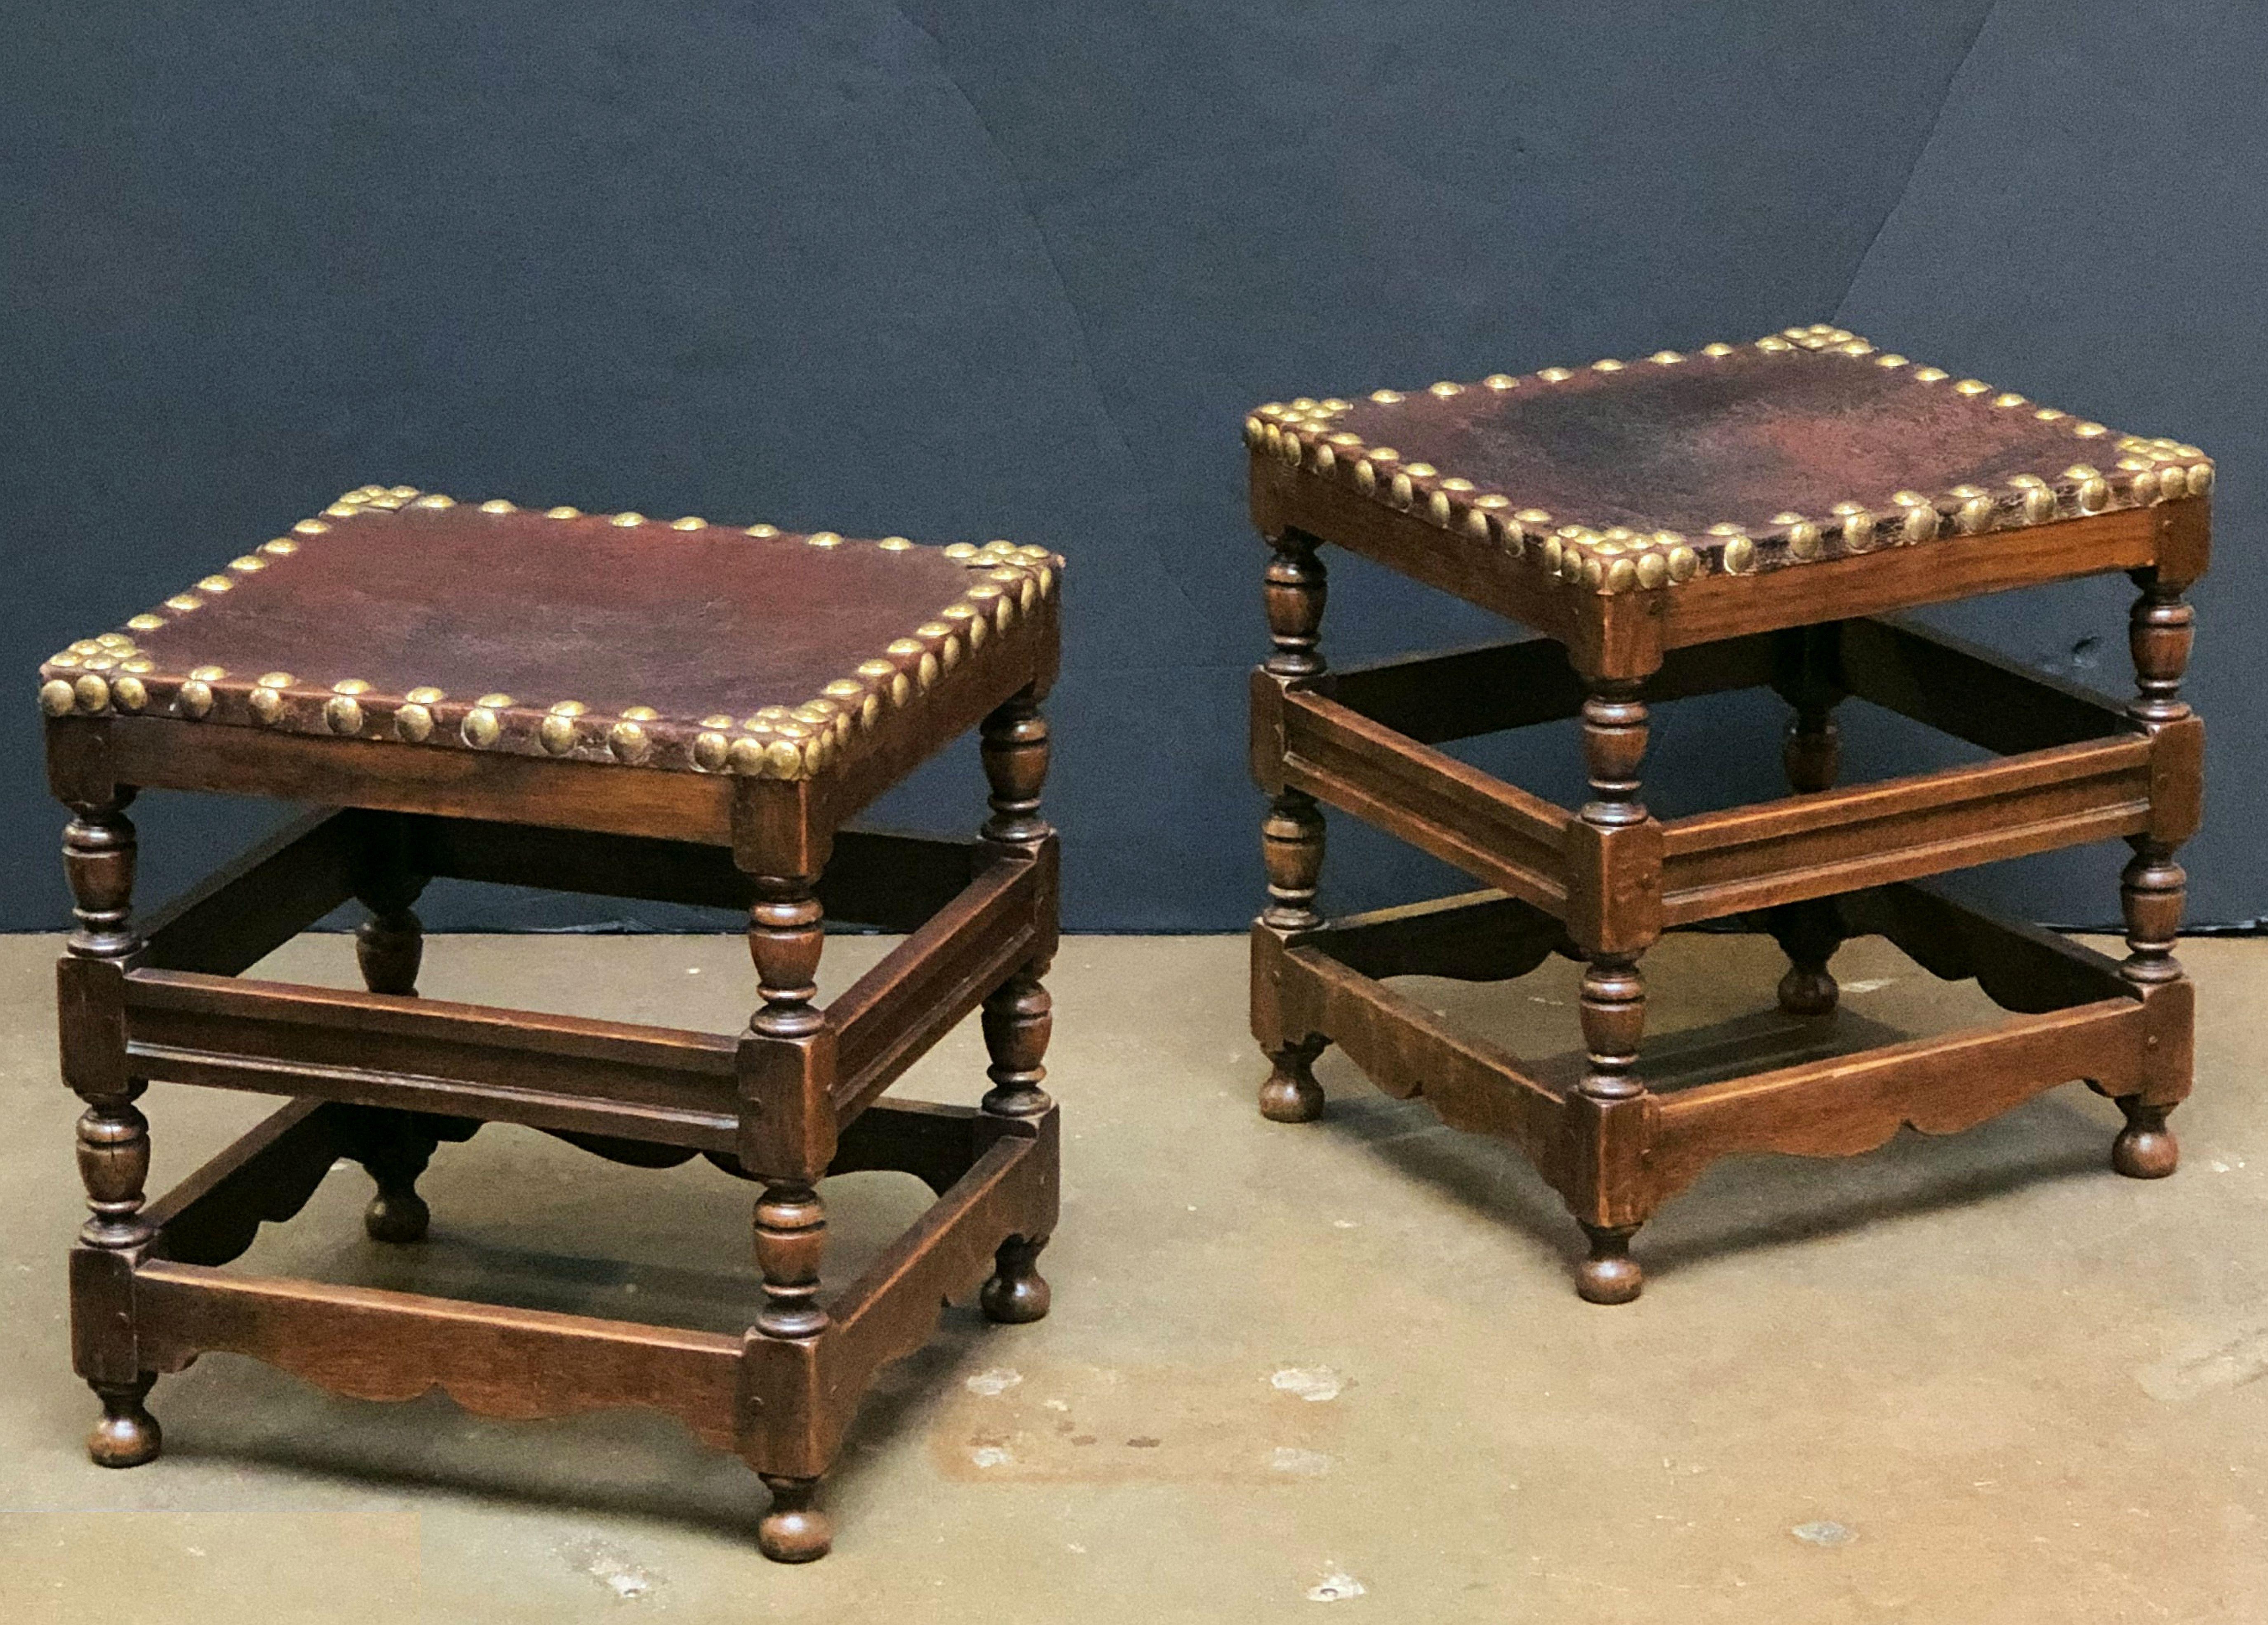 A fine pair of English foot stools from the 19th century, each stool featuring a rectangular leather top with brass nail-head trim over a four-legged stretcher frame of turned oak.

Stool dimensions are:
Height 18 3/4 inches x width 18 1/4 inches